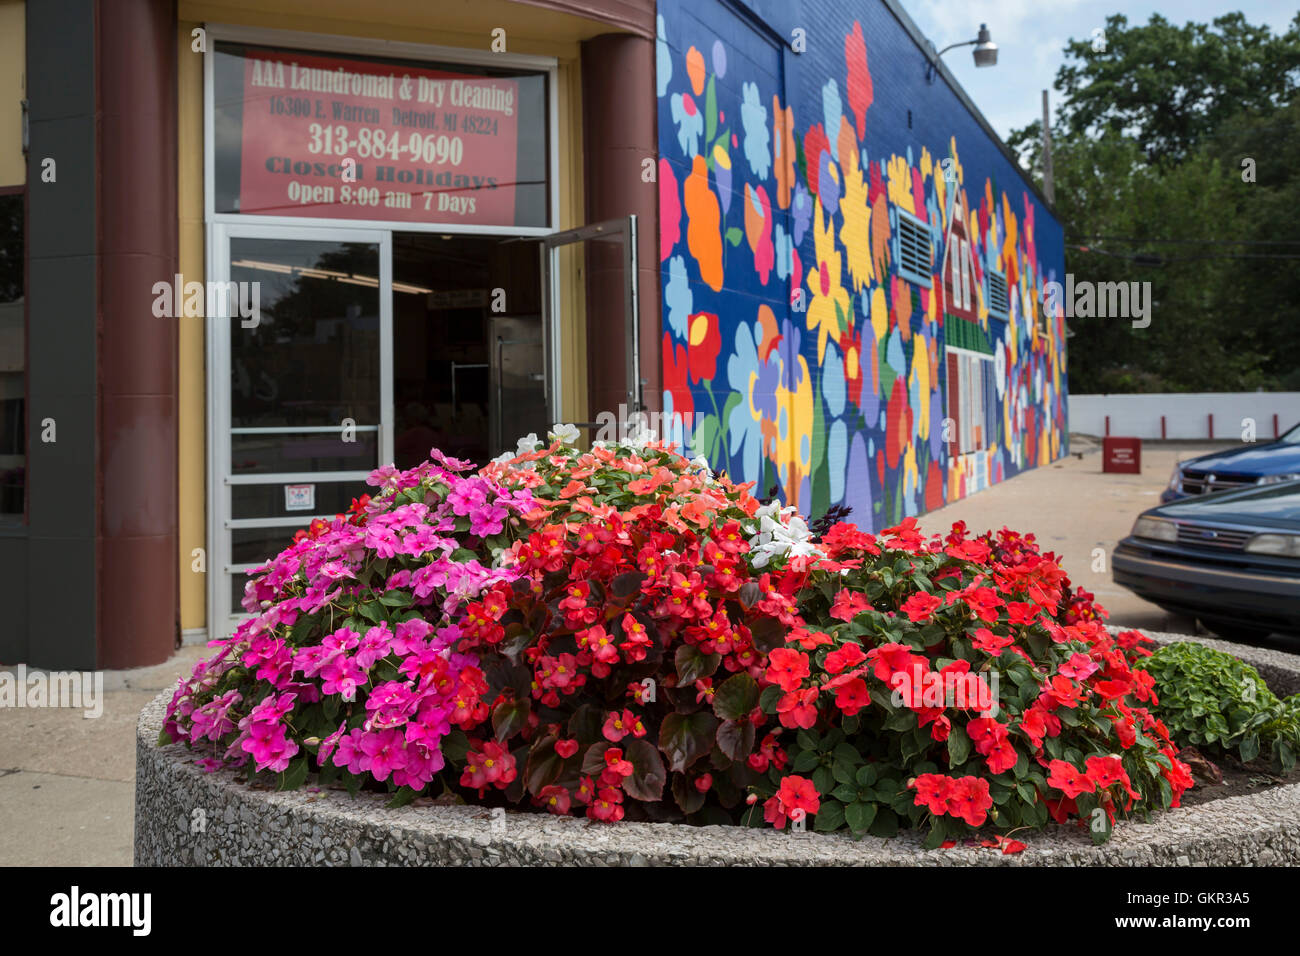 Detroit, Michigan - Flowers in a planter on the city's east side in front of artwork of flowers on a wall. Stock Photo